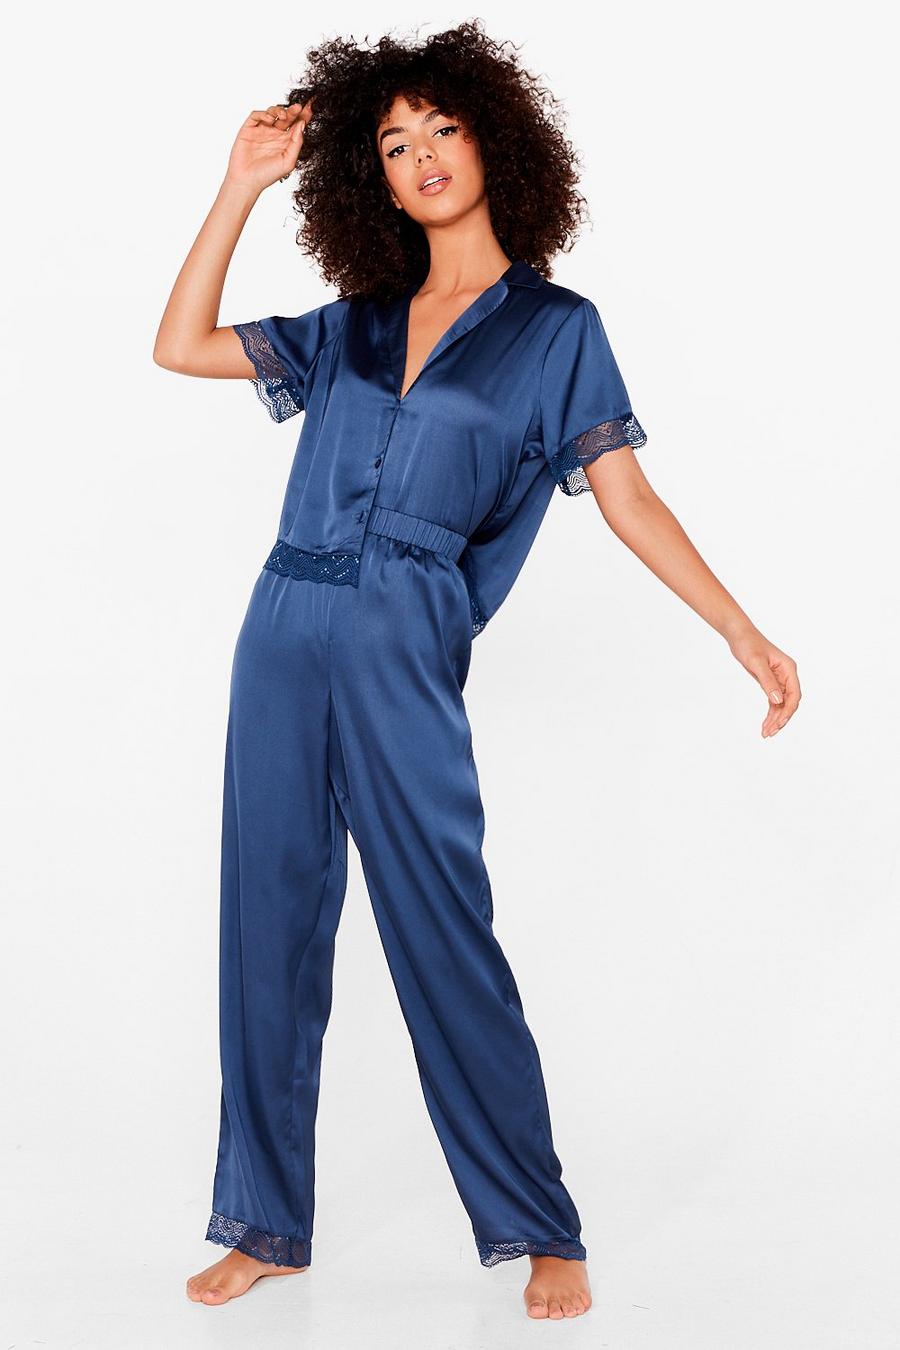 Invest in Rest Satin Lace Trousers Pyjama Set